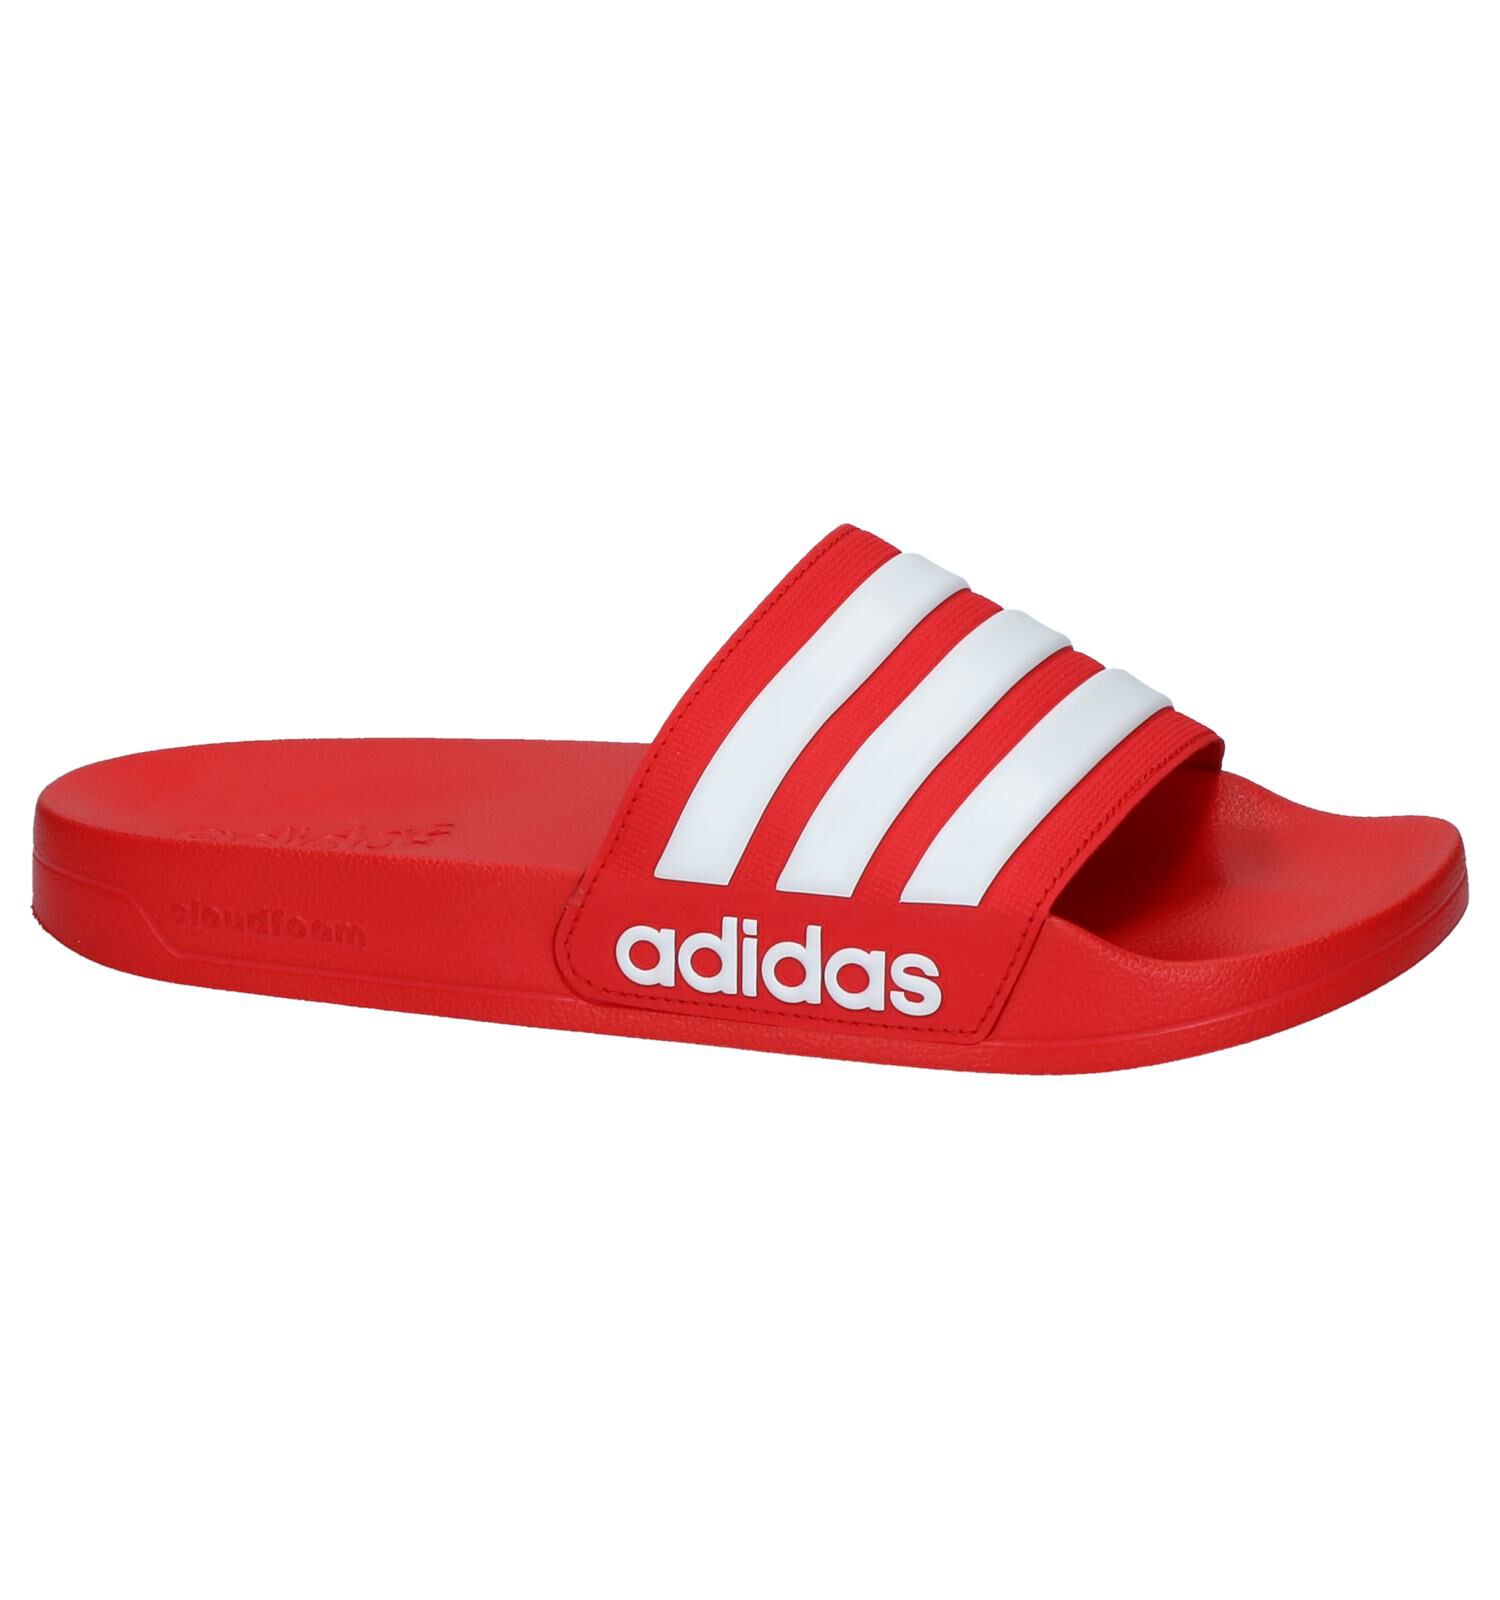 rode adidas slippers